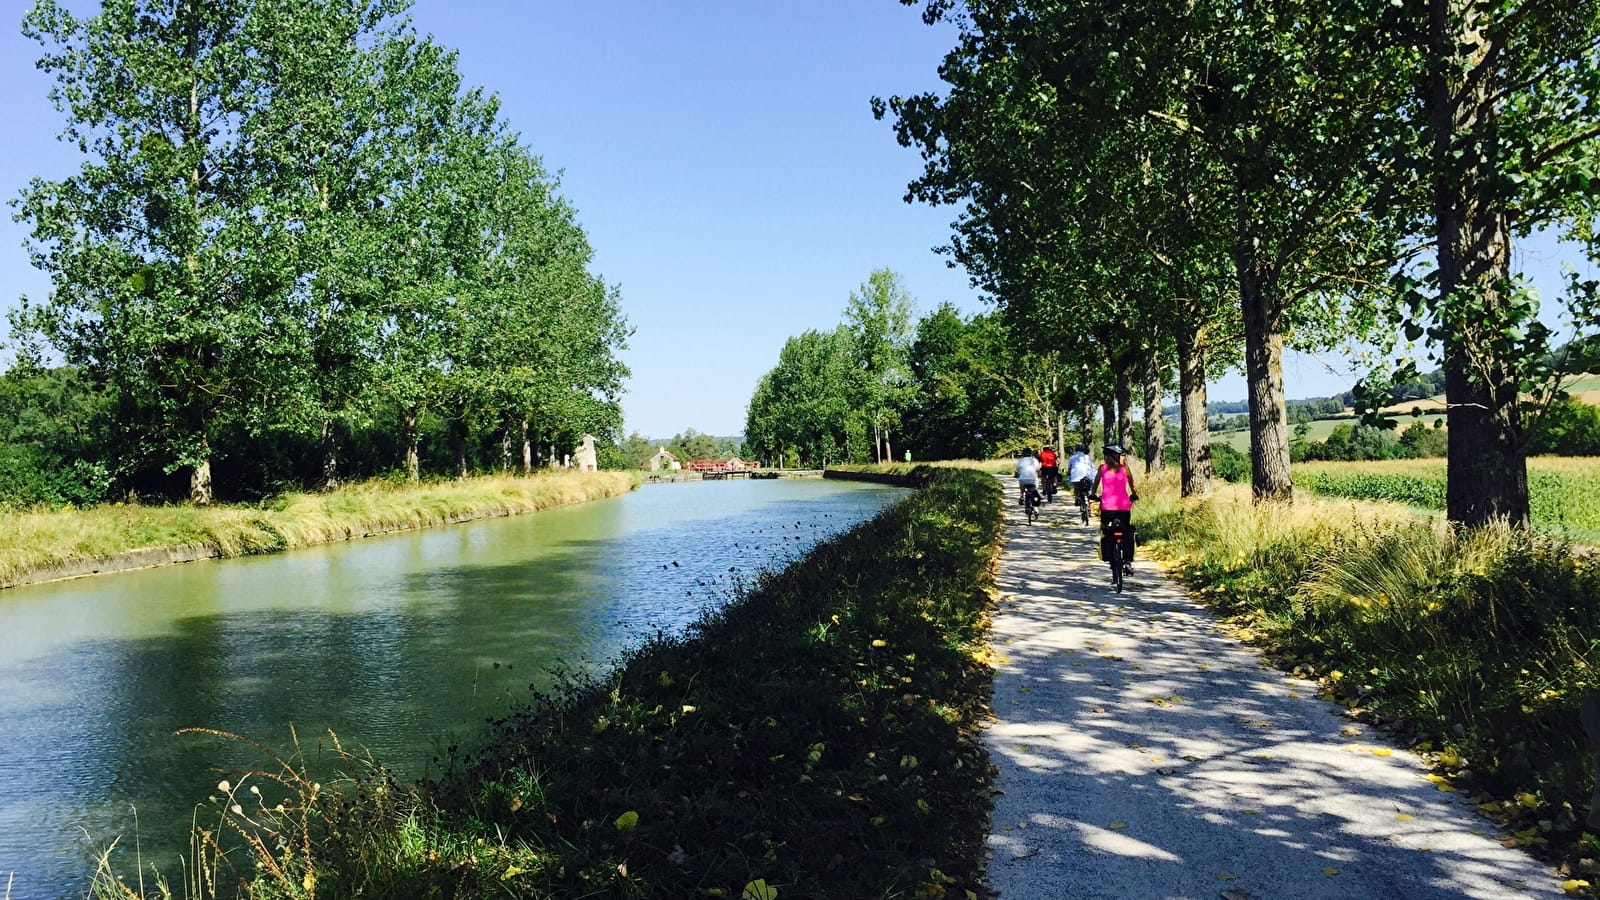 A day on the bike - Along the Burgundy canal